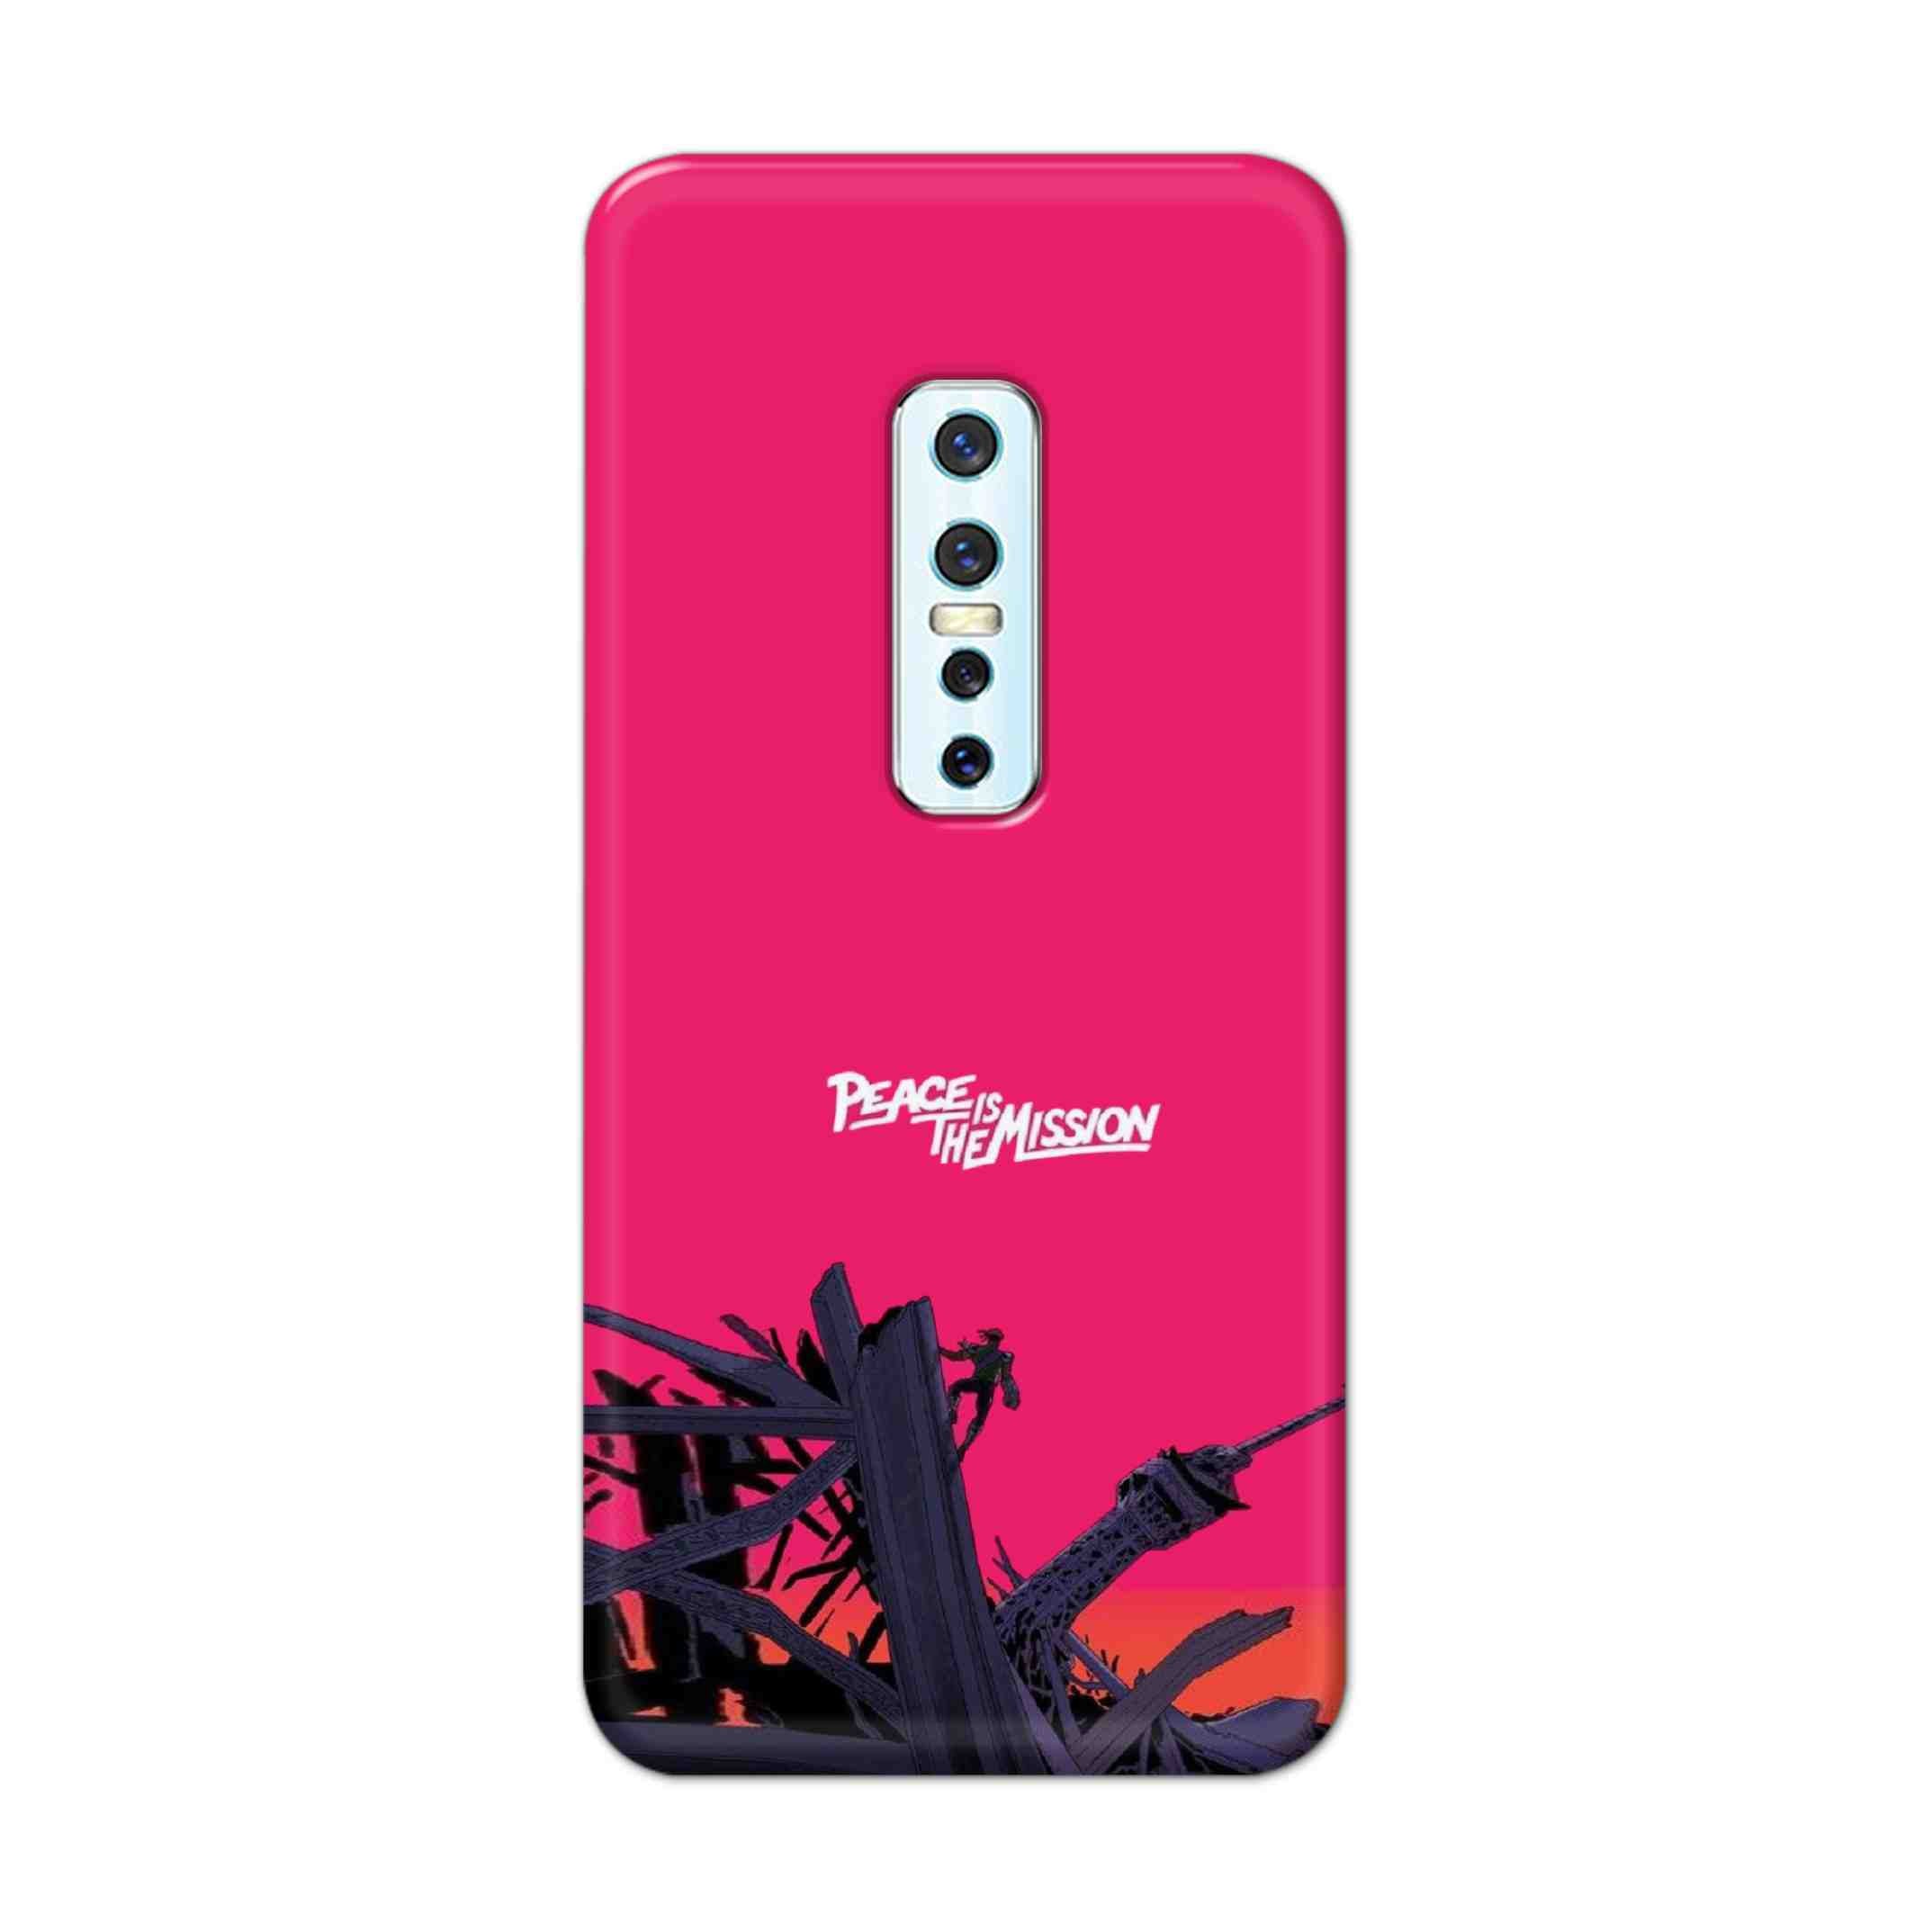 Buy Peace Is The Mission Hard Back Mobile Phone Case Cover For Vivo V17 Pro Online